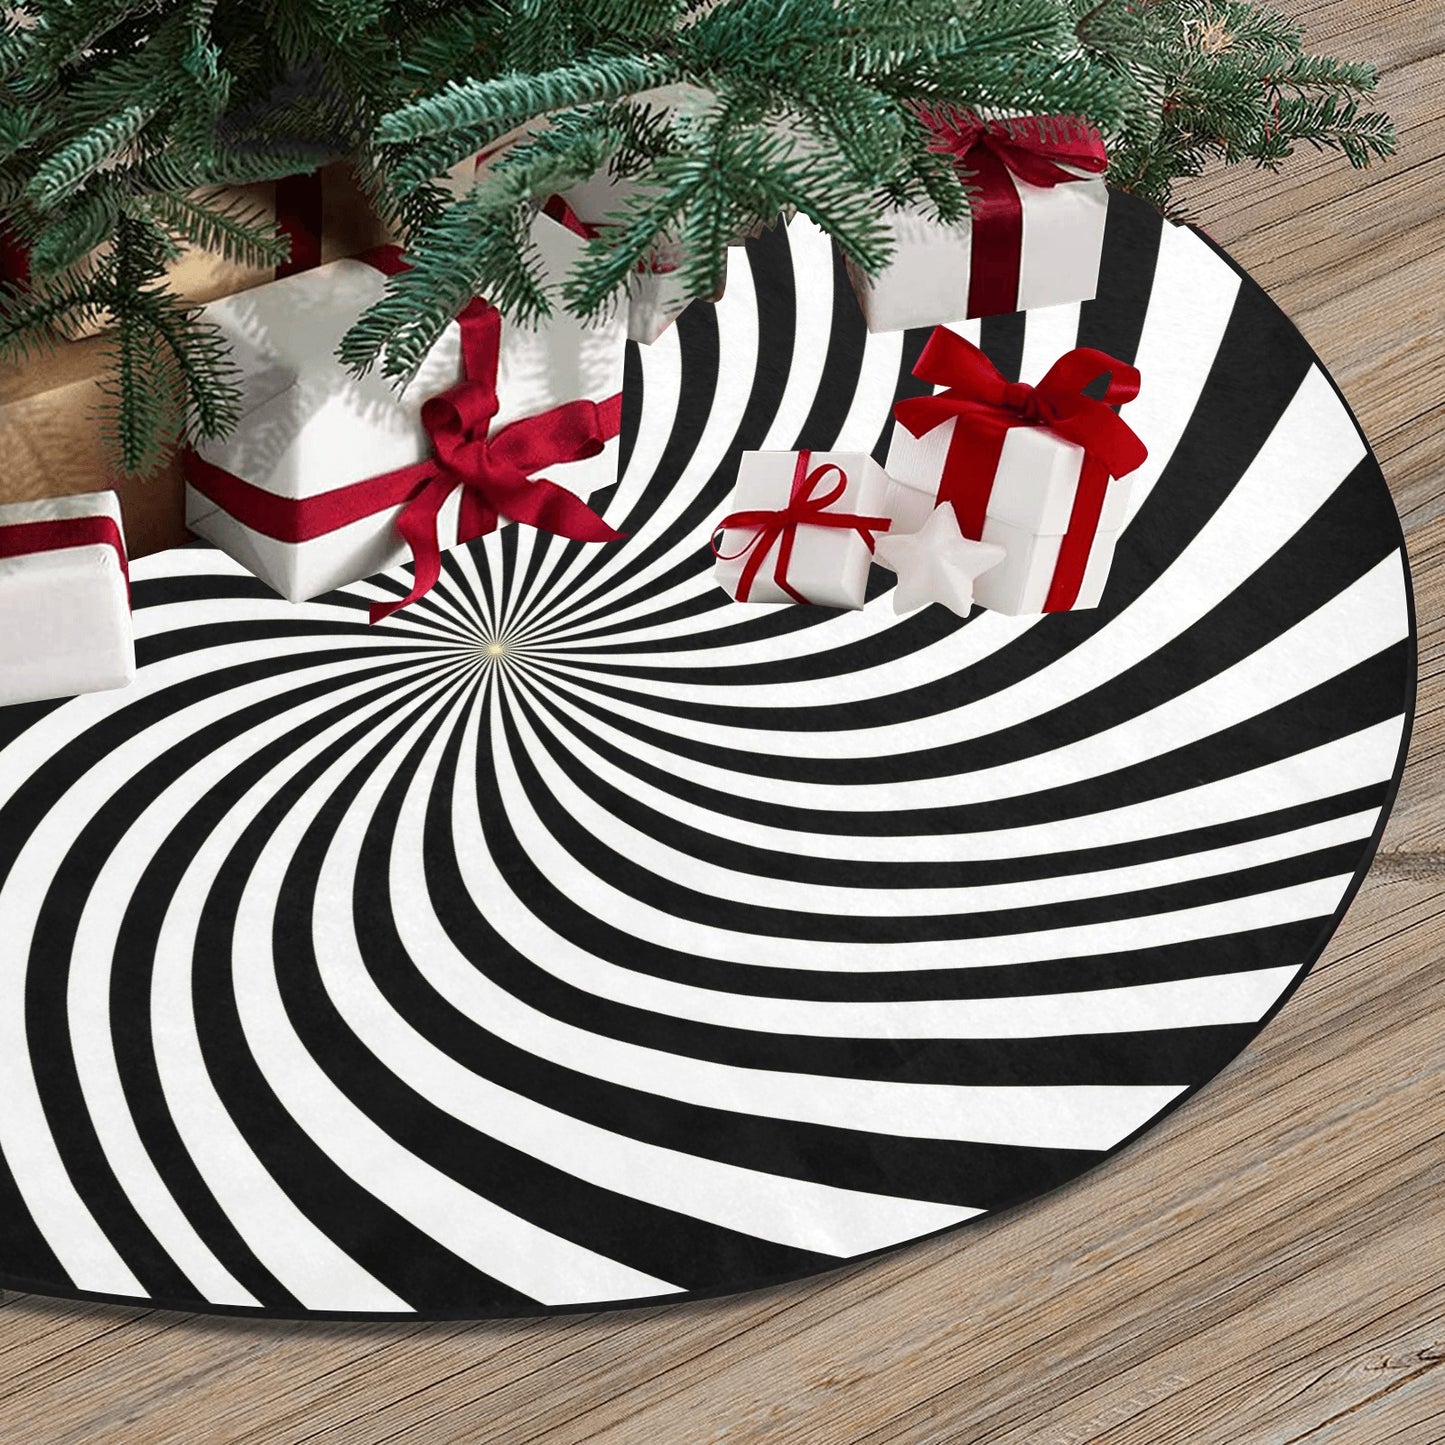 Halloween Tree Skirt, Black White Spiral Christmas Small Large Cover Goth Home Decor Decoration All Hallows Eve Creepy Spooky Party Starcove Fashion